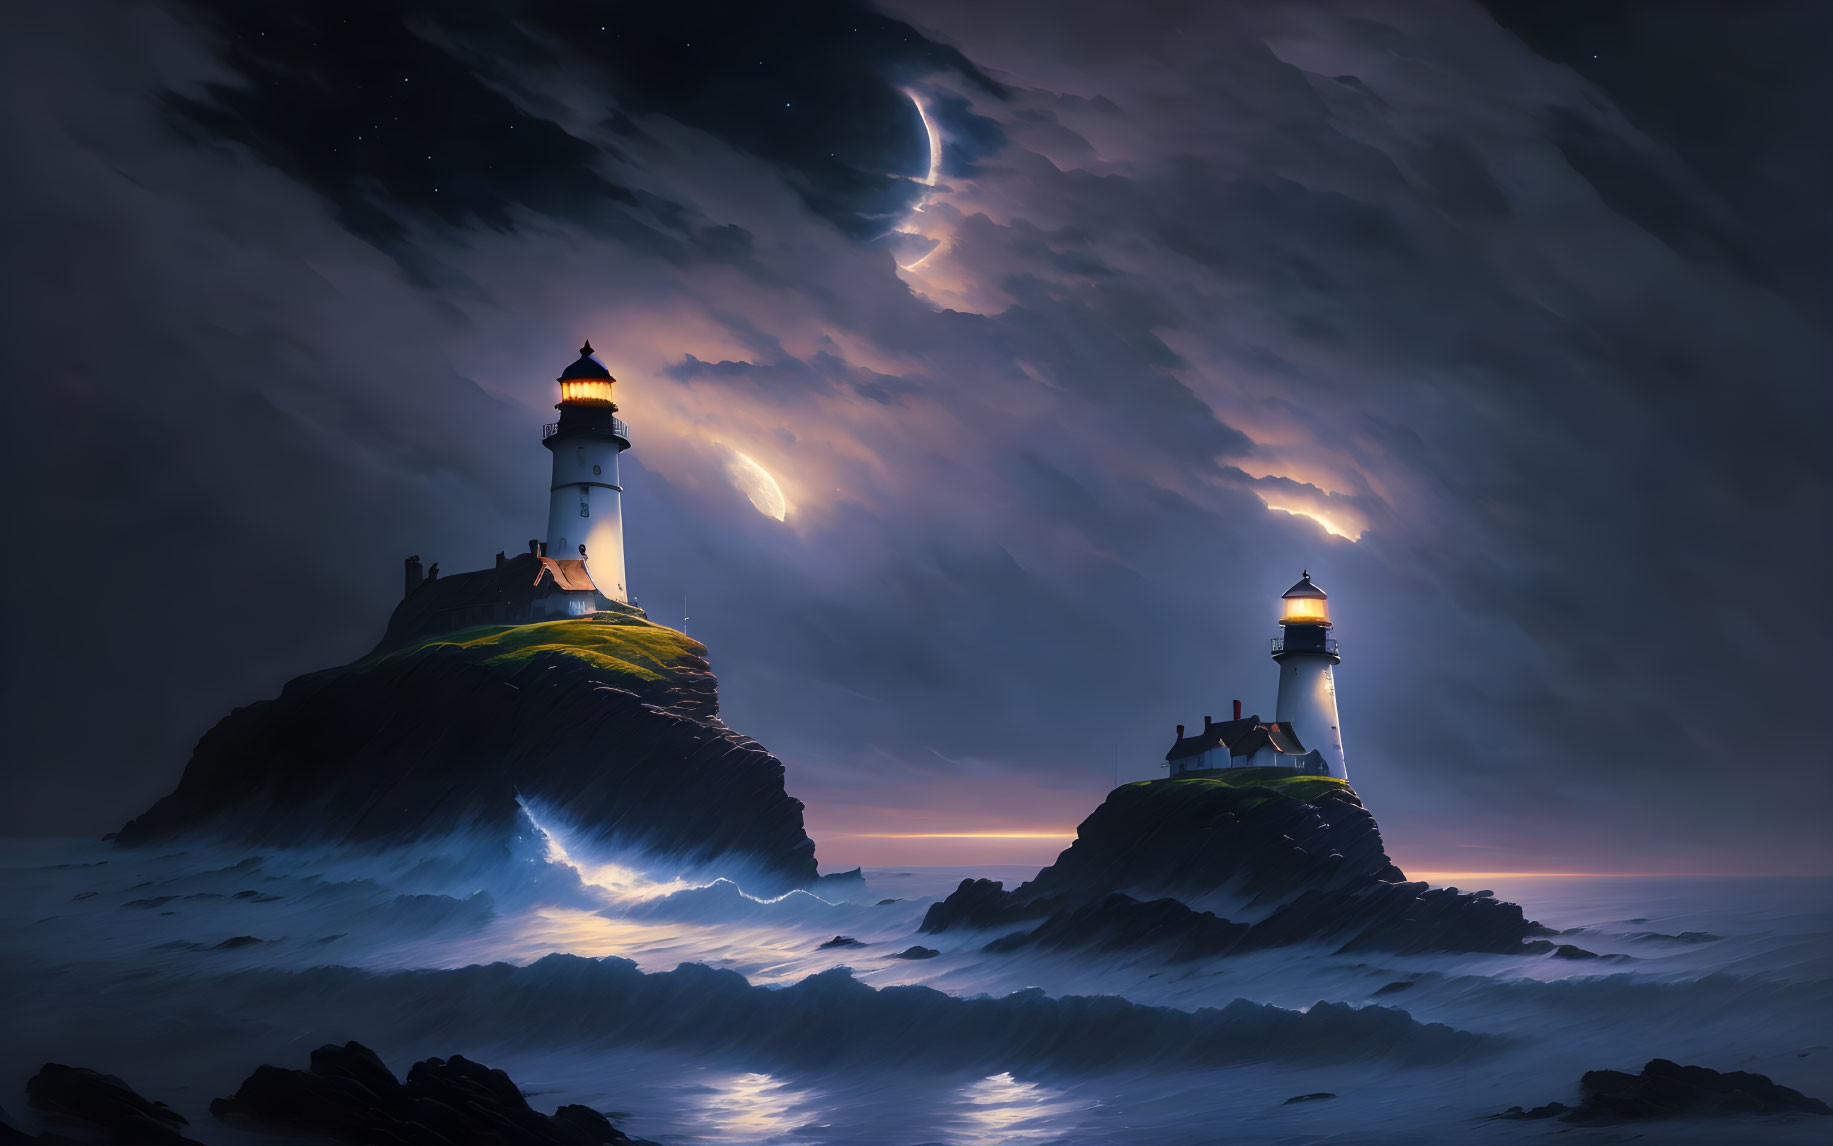 Rugged cliffs with two lighthouses under a cosmic night sky